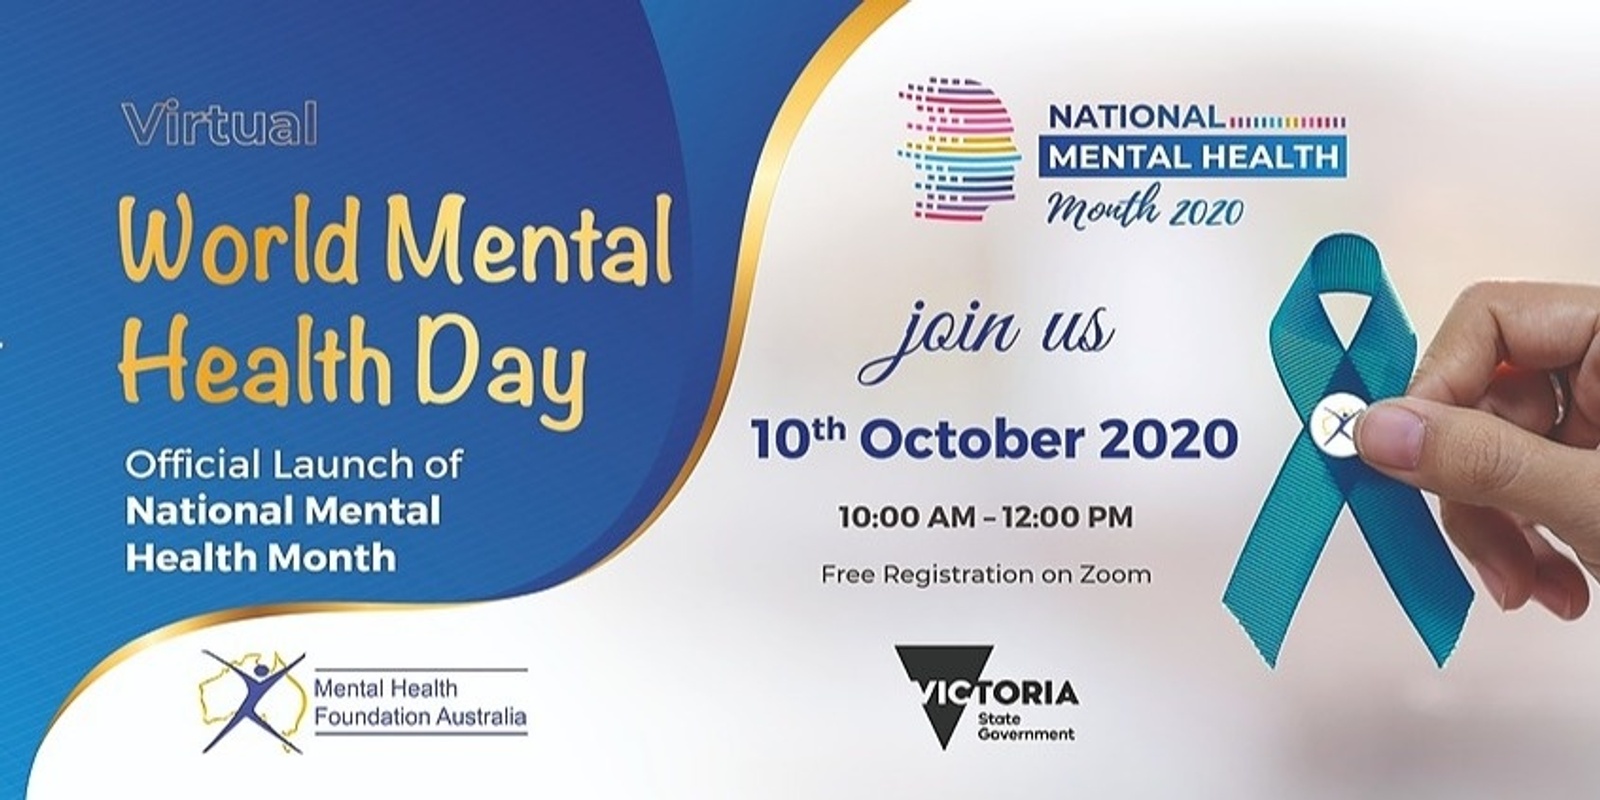 Banner image for Official Launch National Mental Health Month 2020 - World Mental Health Day